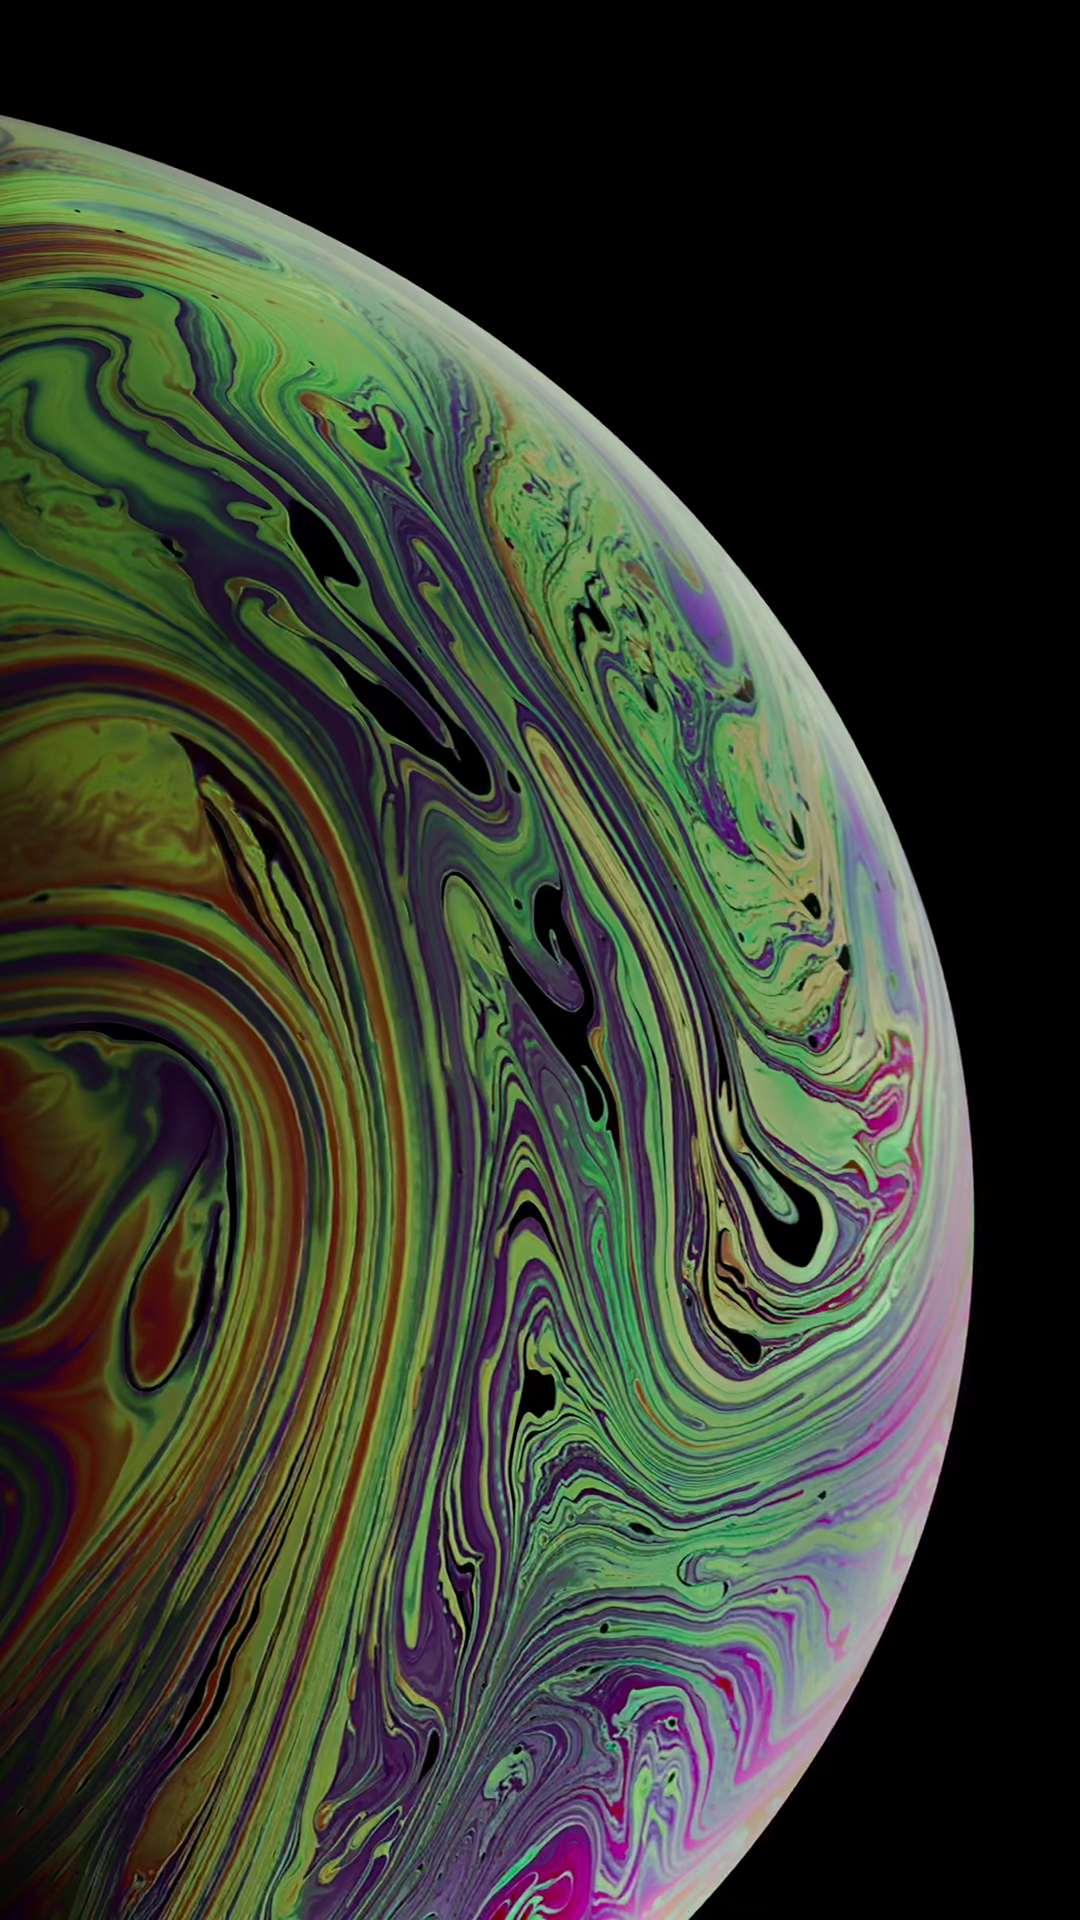 Iphone Xs Max Amoled Wallpapers